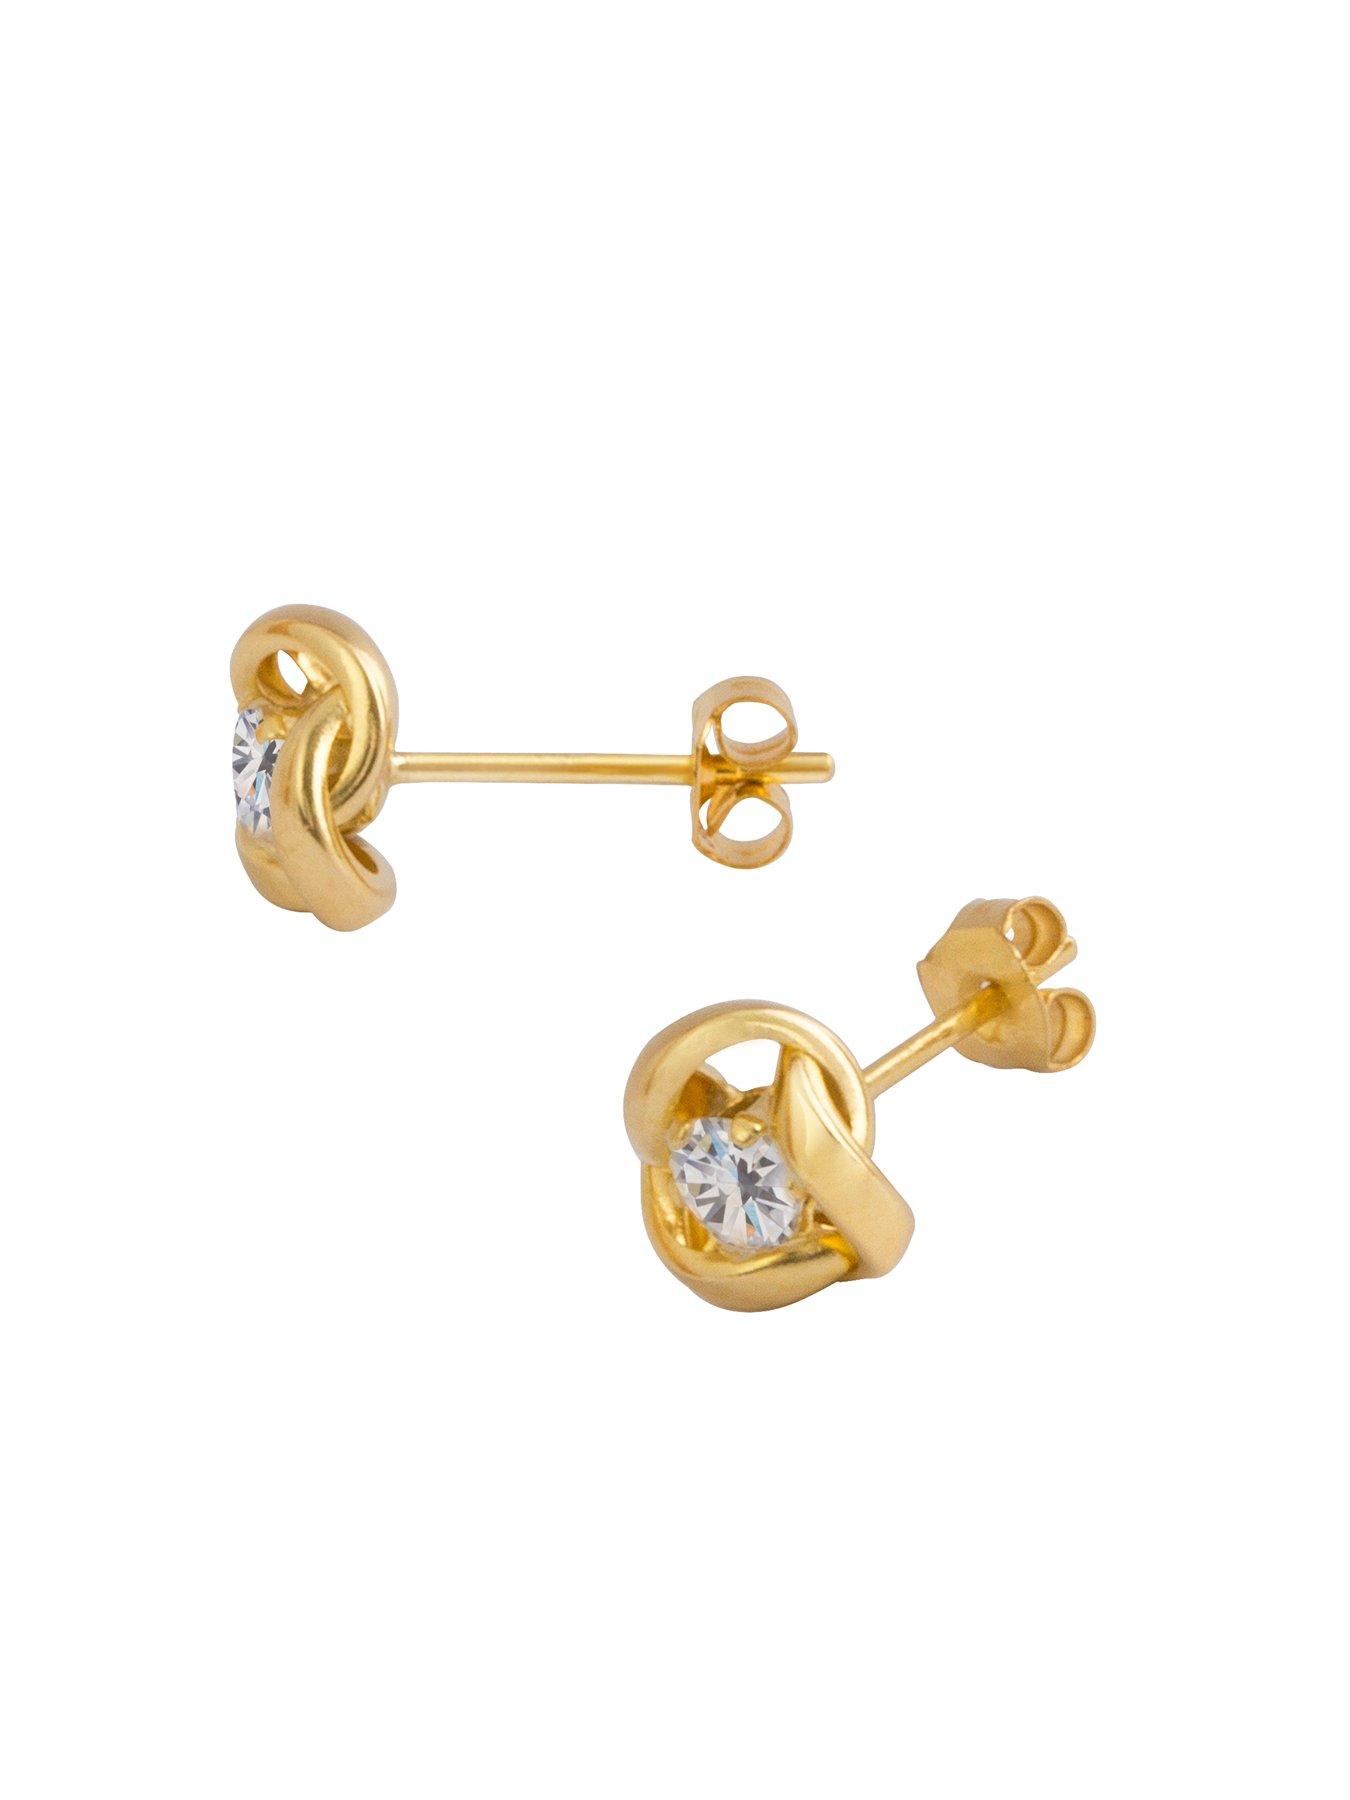 Jewellery & watches 9ct Gold 6.5mm three-way knot studs with 3mm Cubic Zirconia